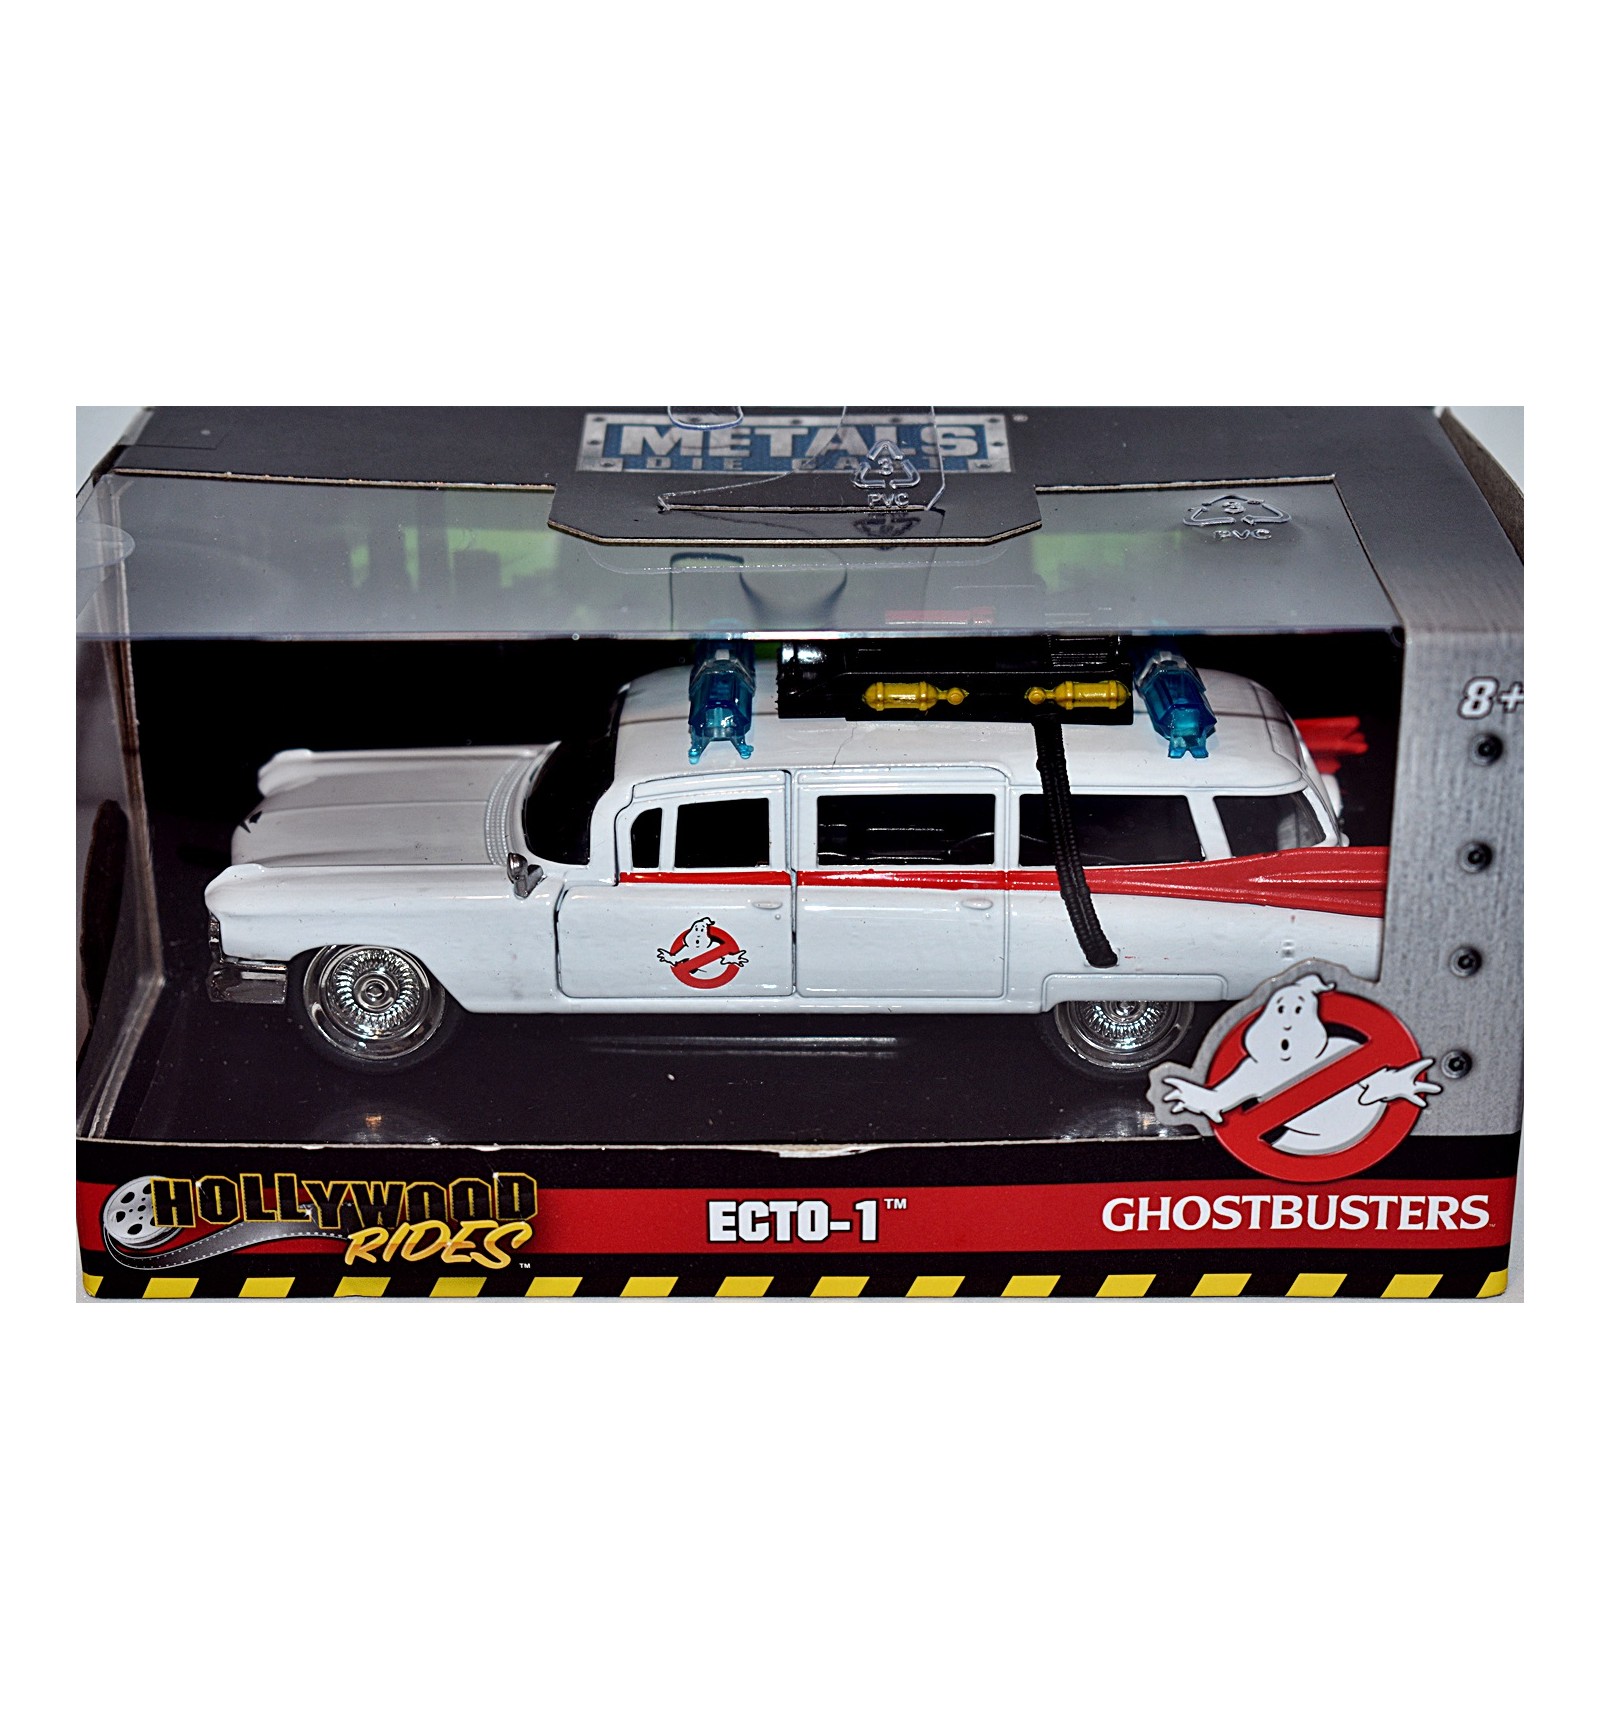 Ghostbusters ECTO-1 1/32 Scale Jada Hollywood Rides 